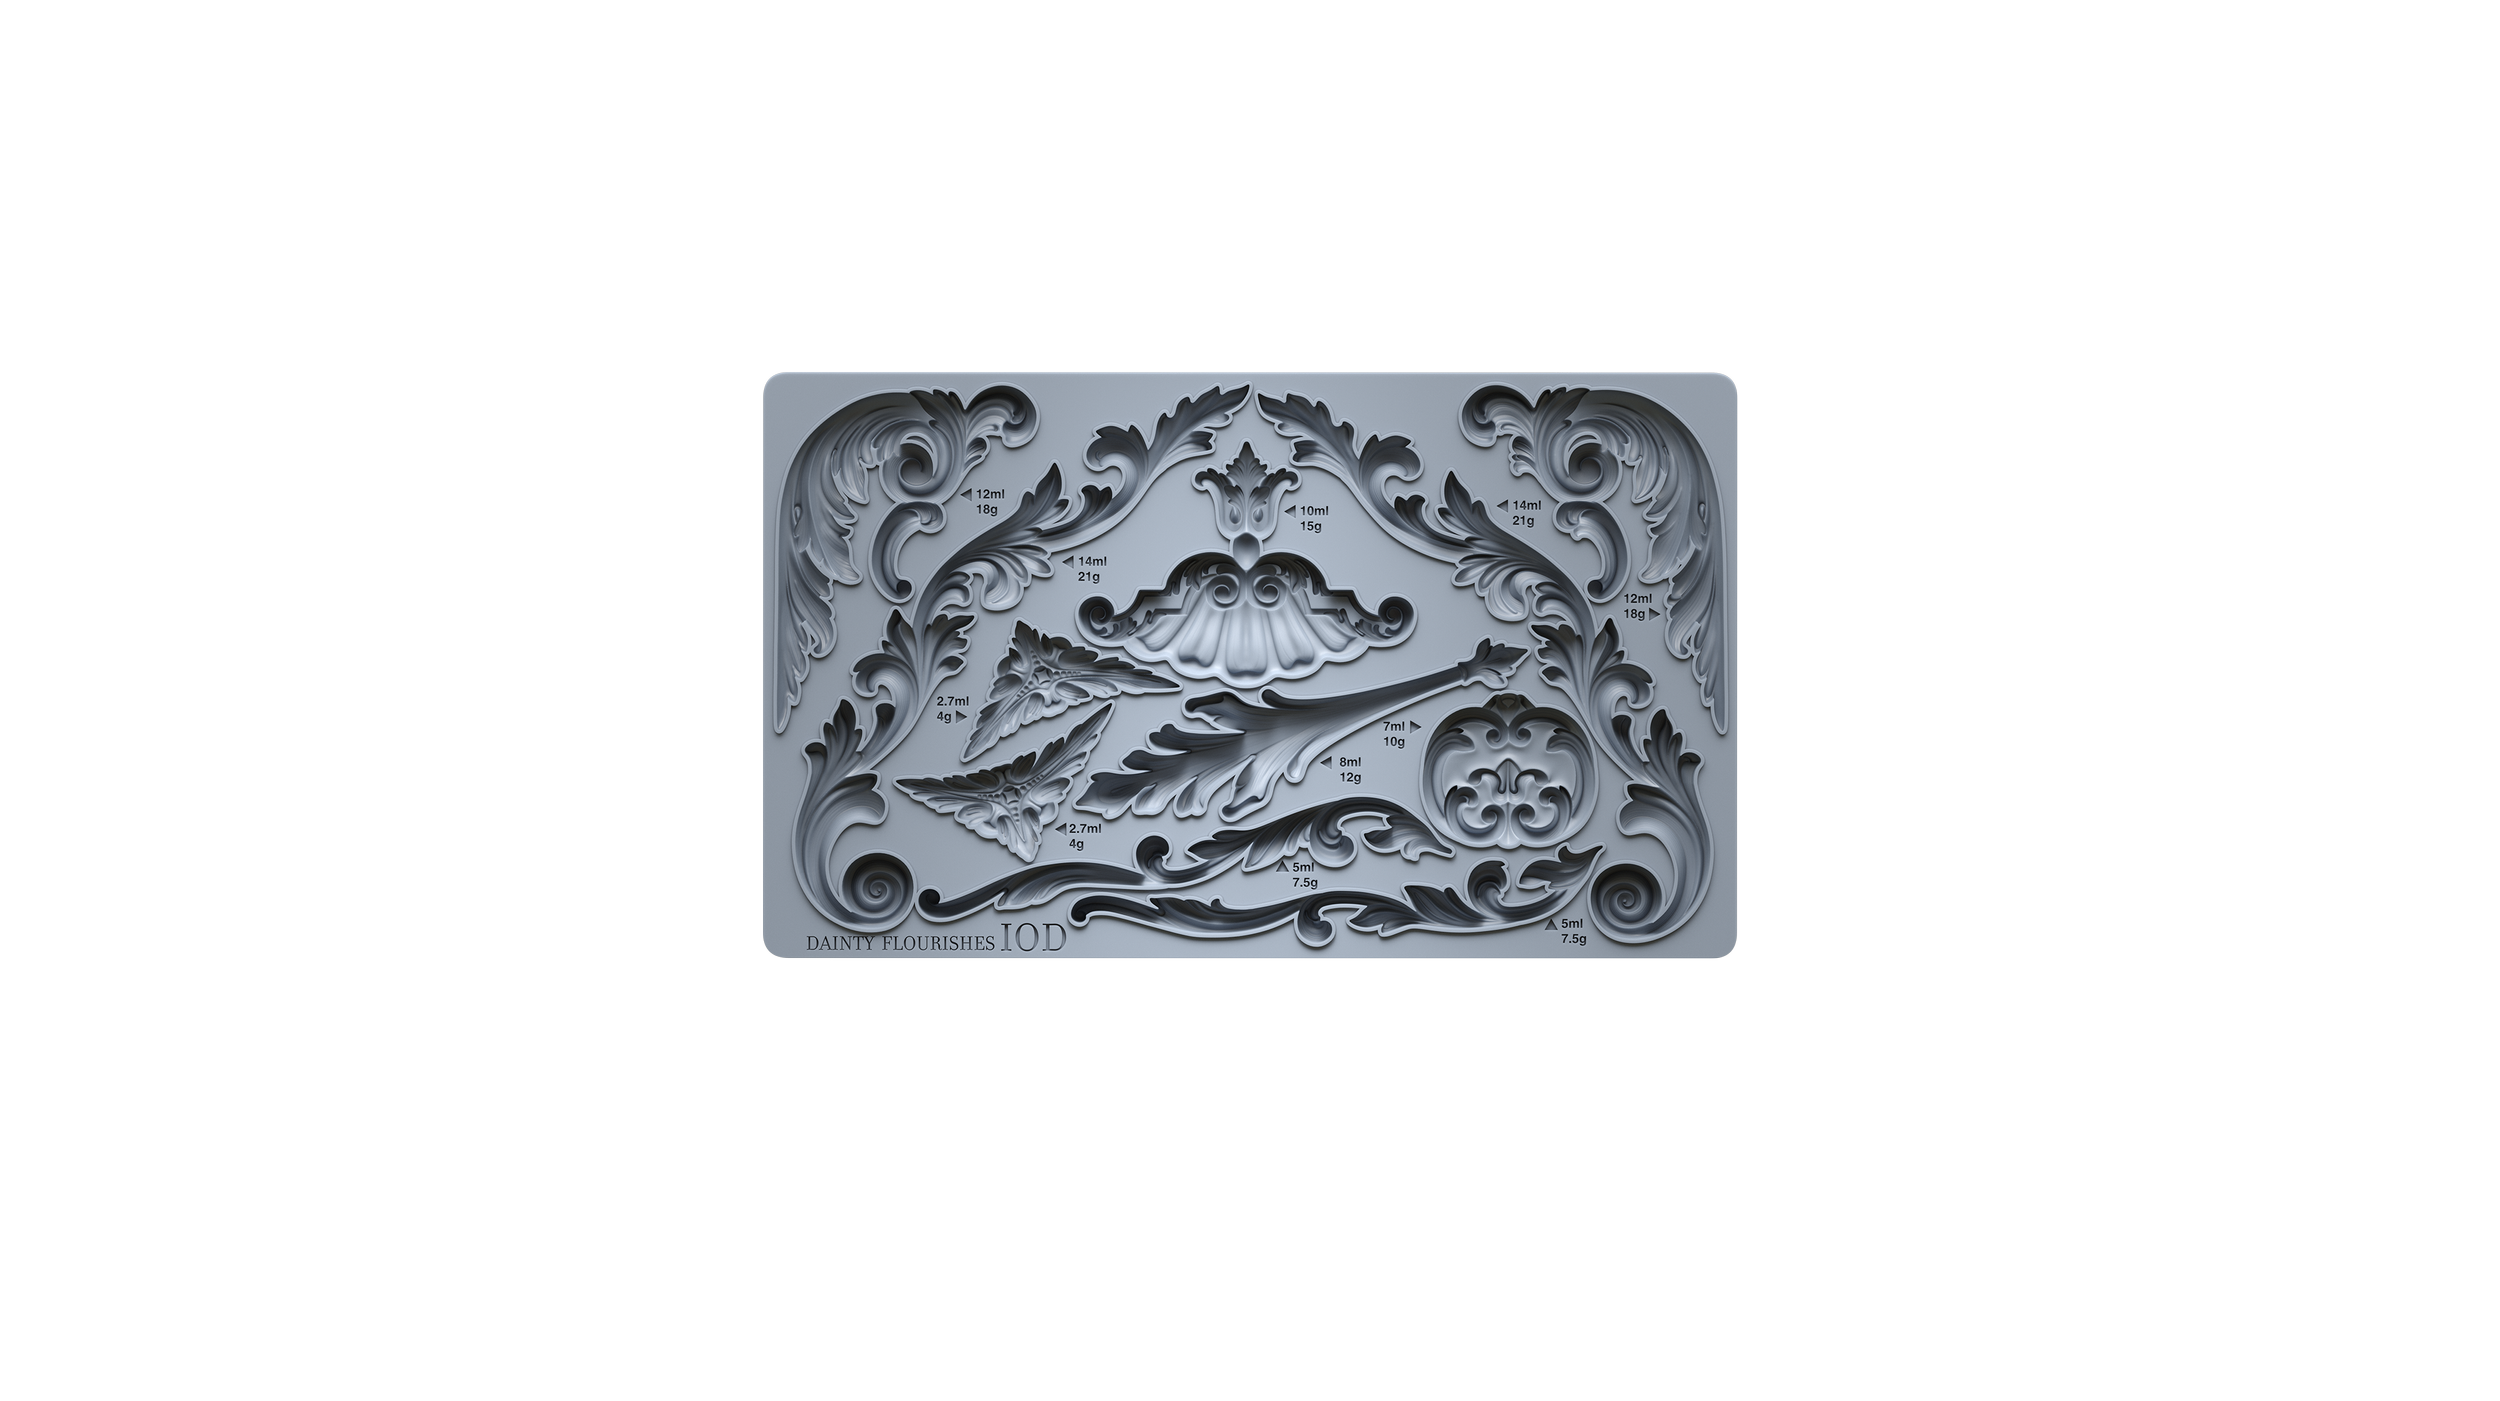 Dainty Flourishes IOD décor mould 6 x 10 - by Iron Orchid Designs - New  Release